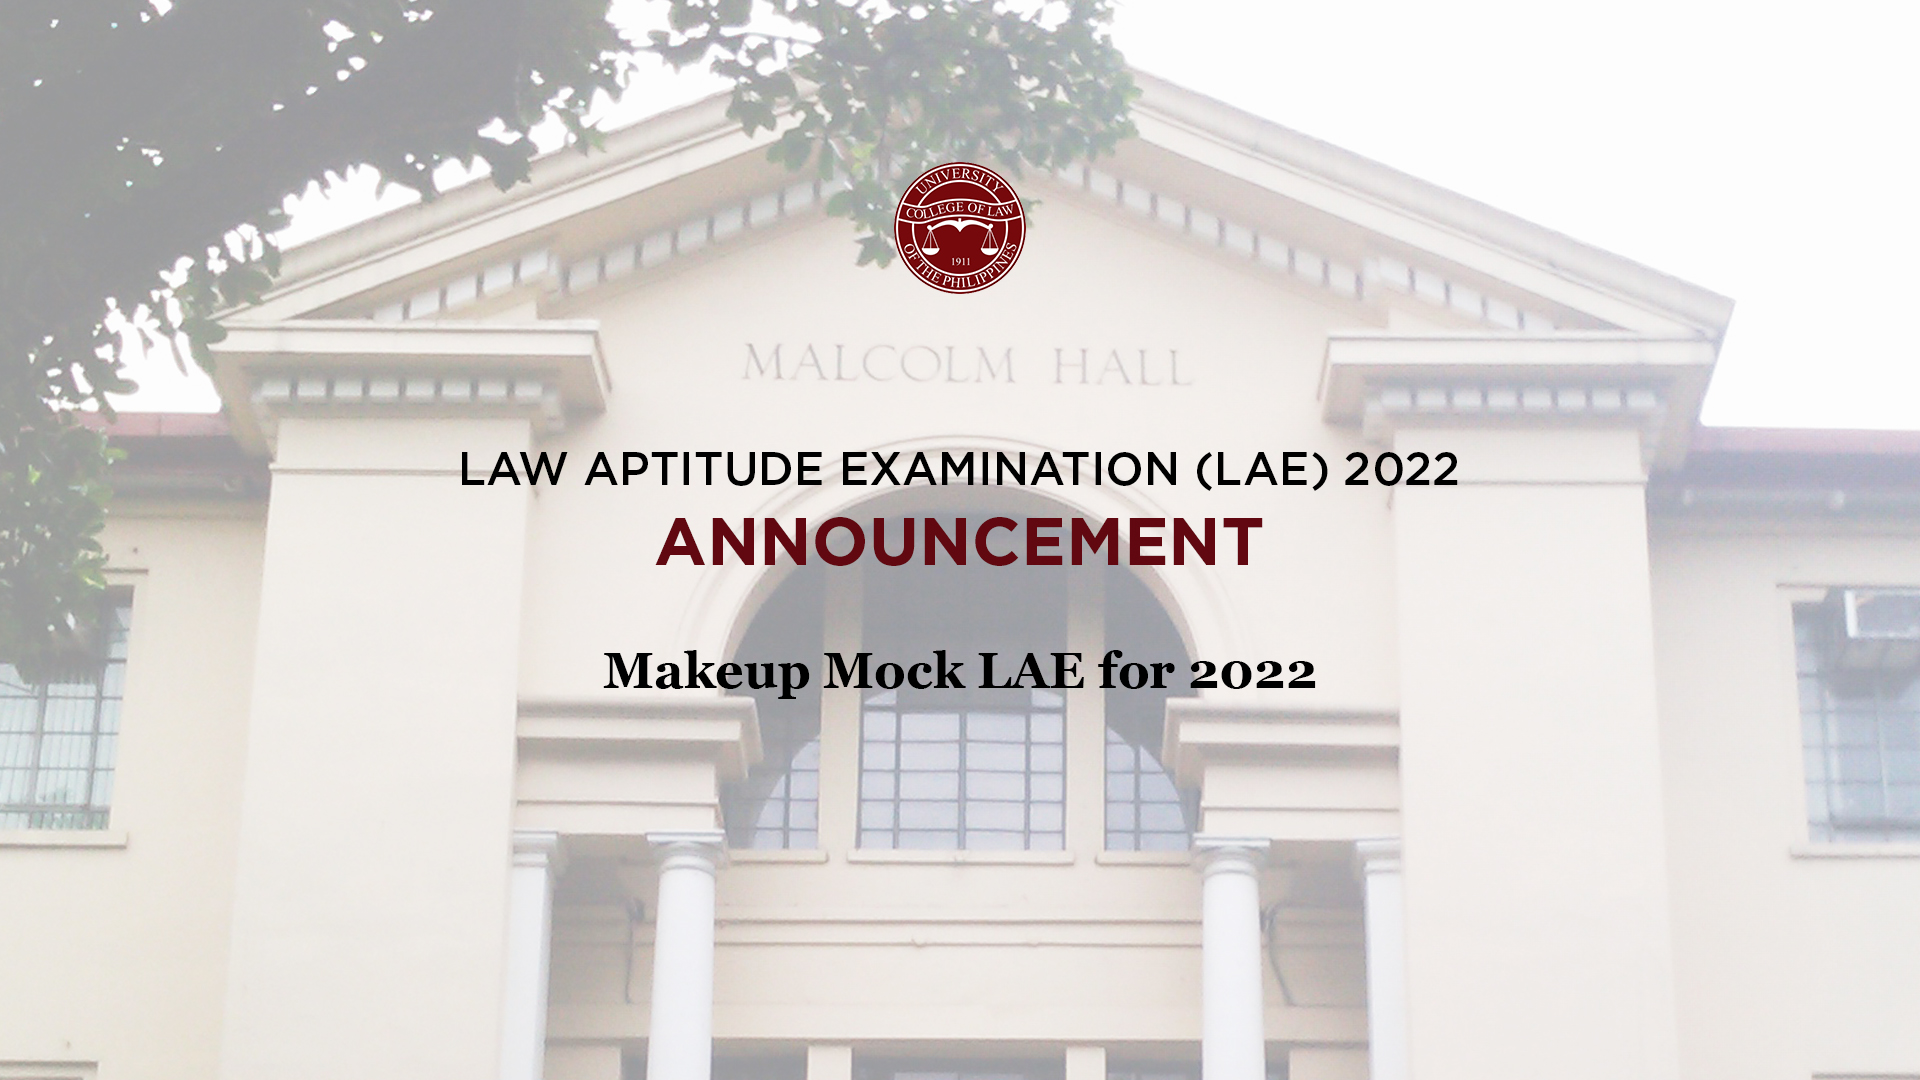 LAE Announcement Re Makeup Mock LAE for 2022